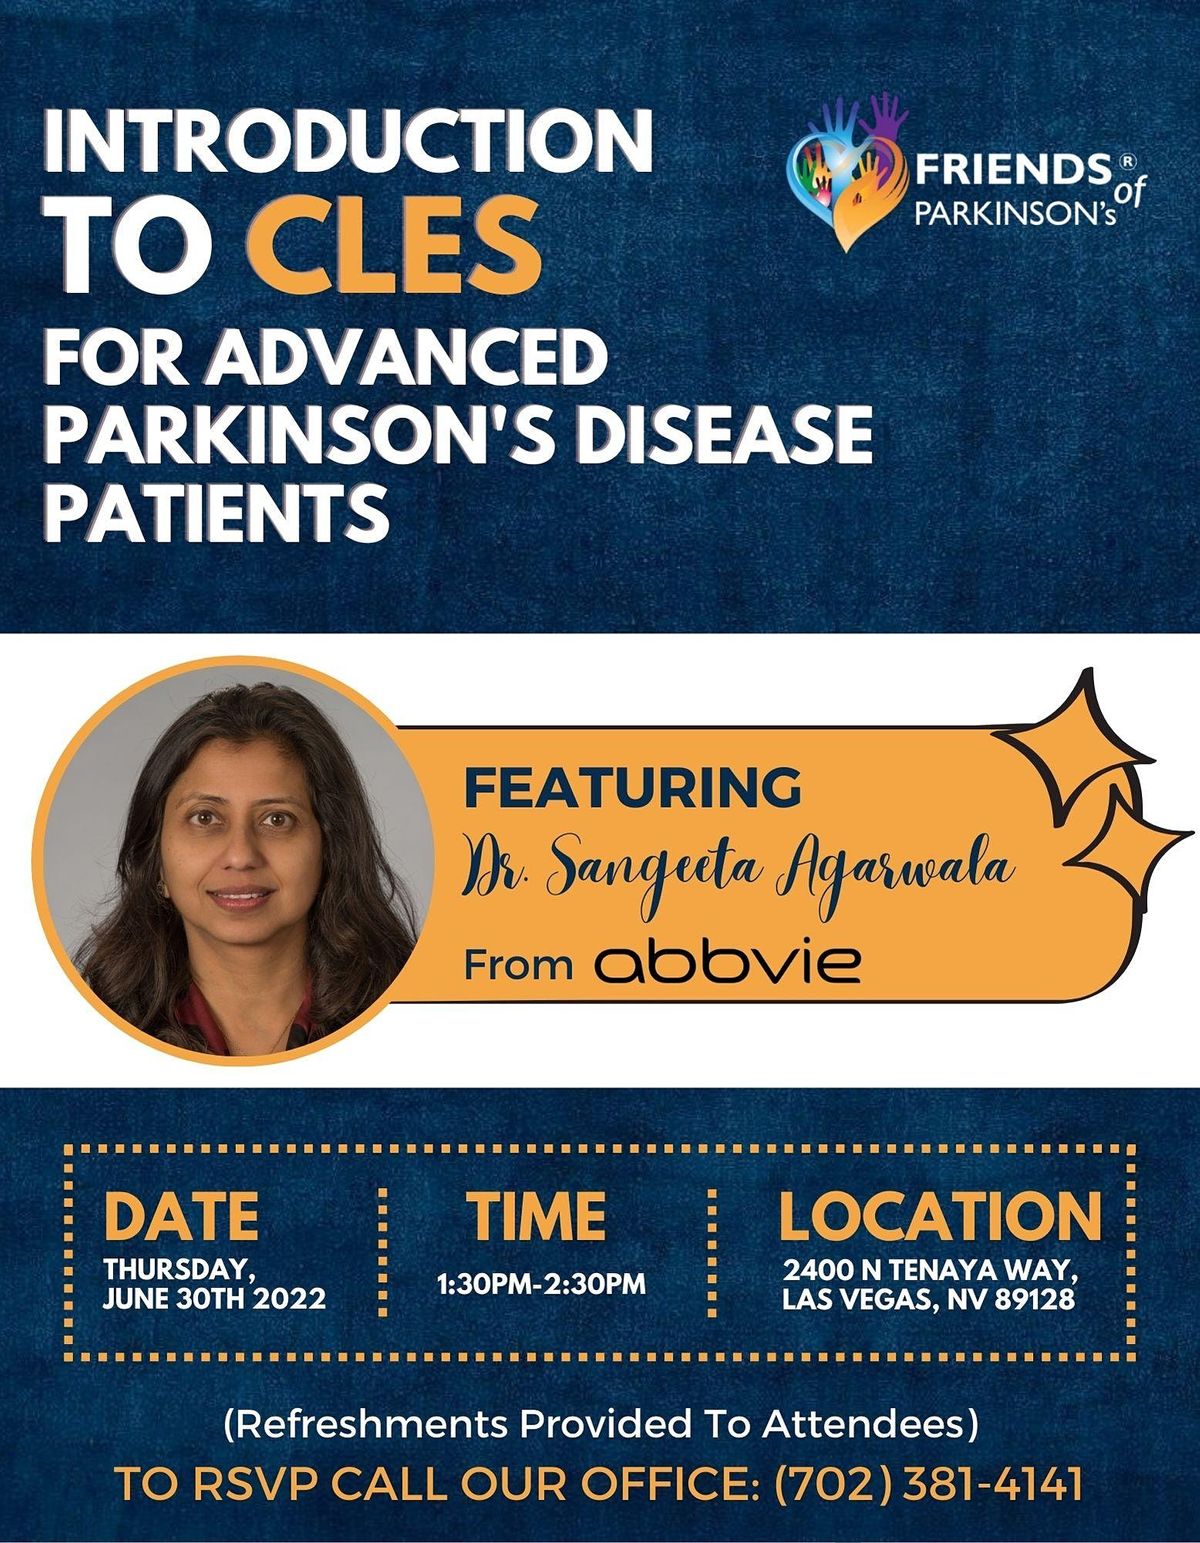 Introduction To CLES For Advanced Parkinson's Disease patients